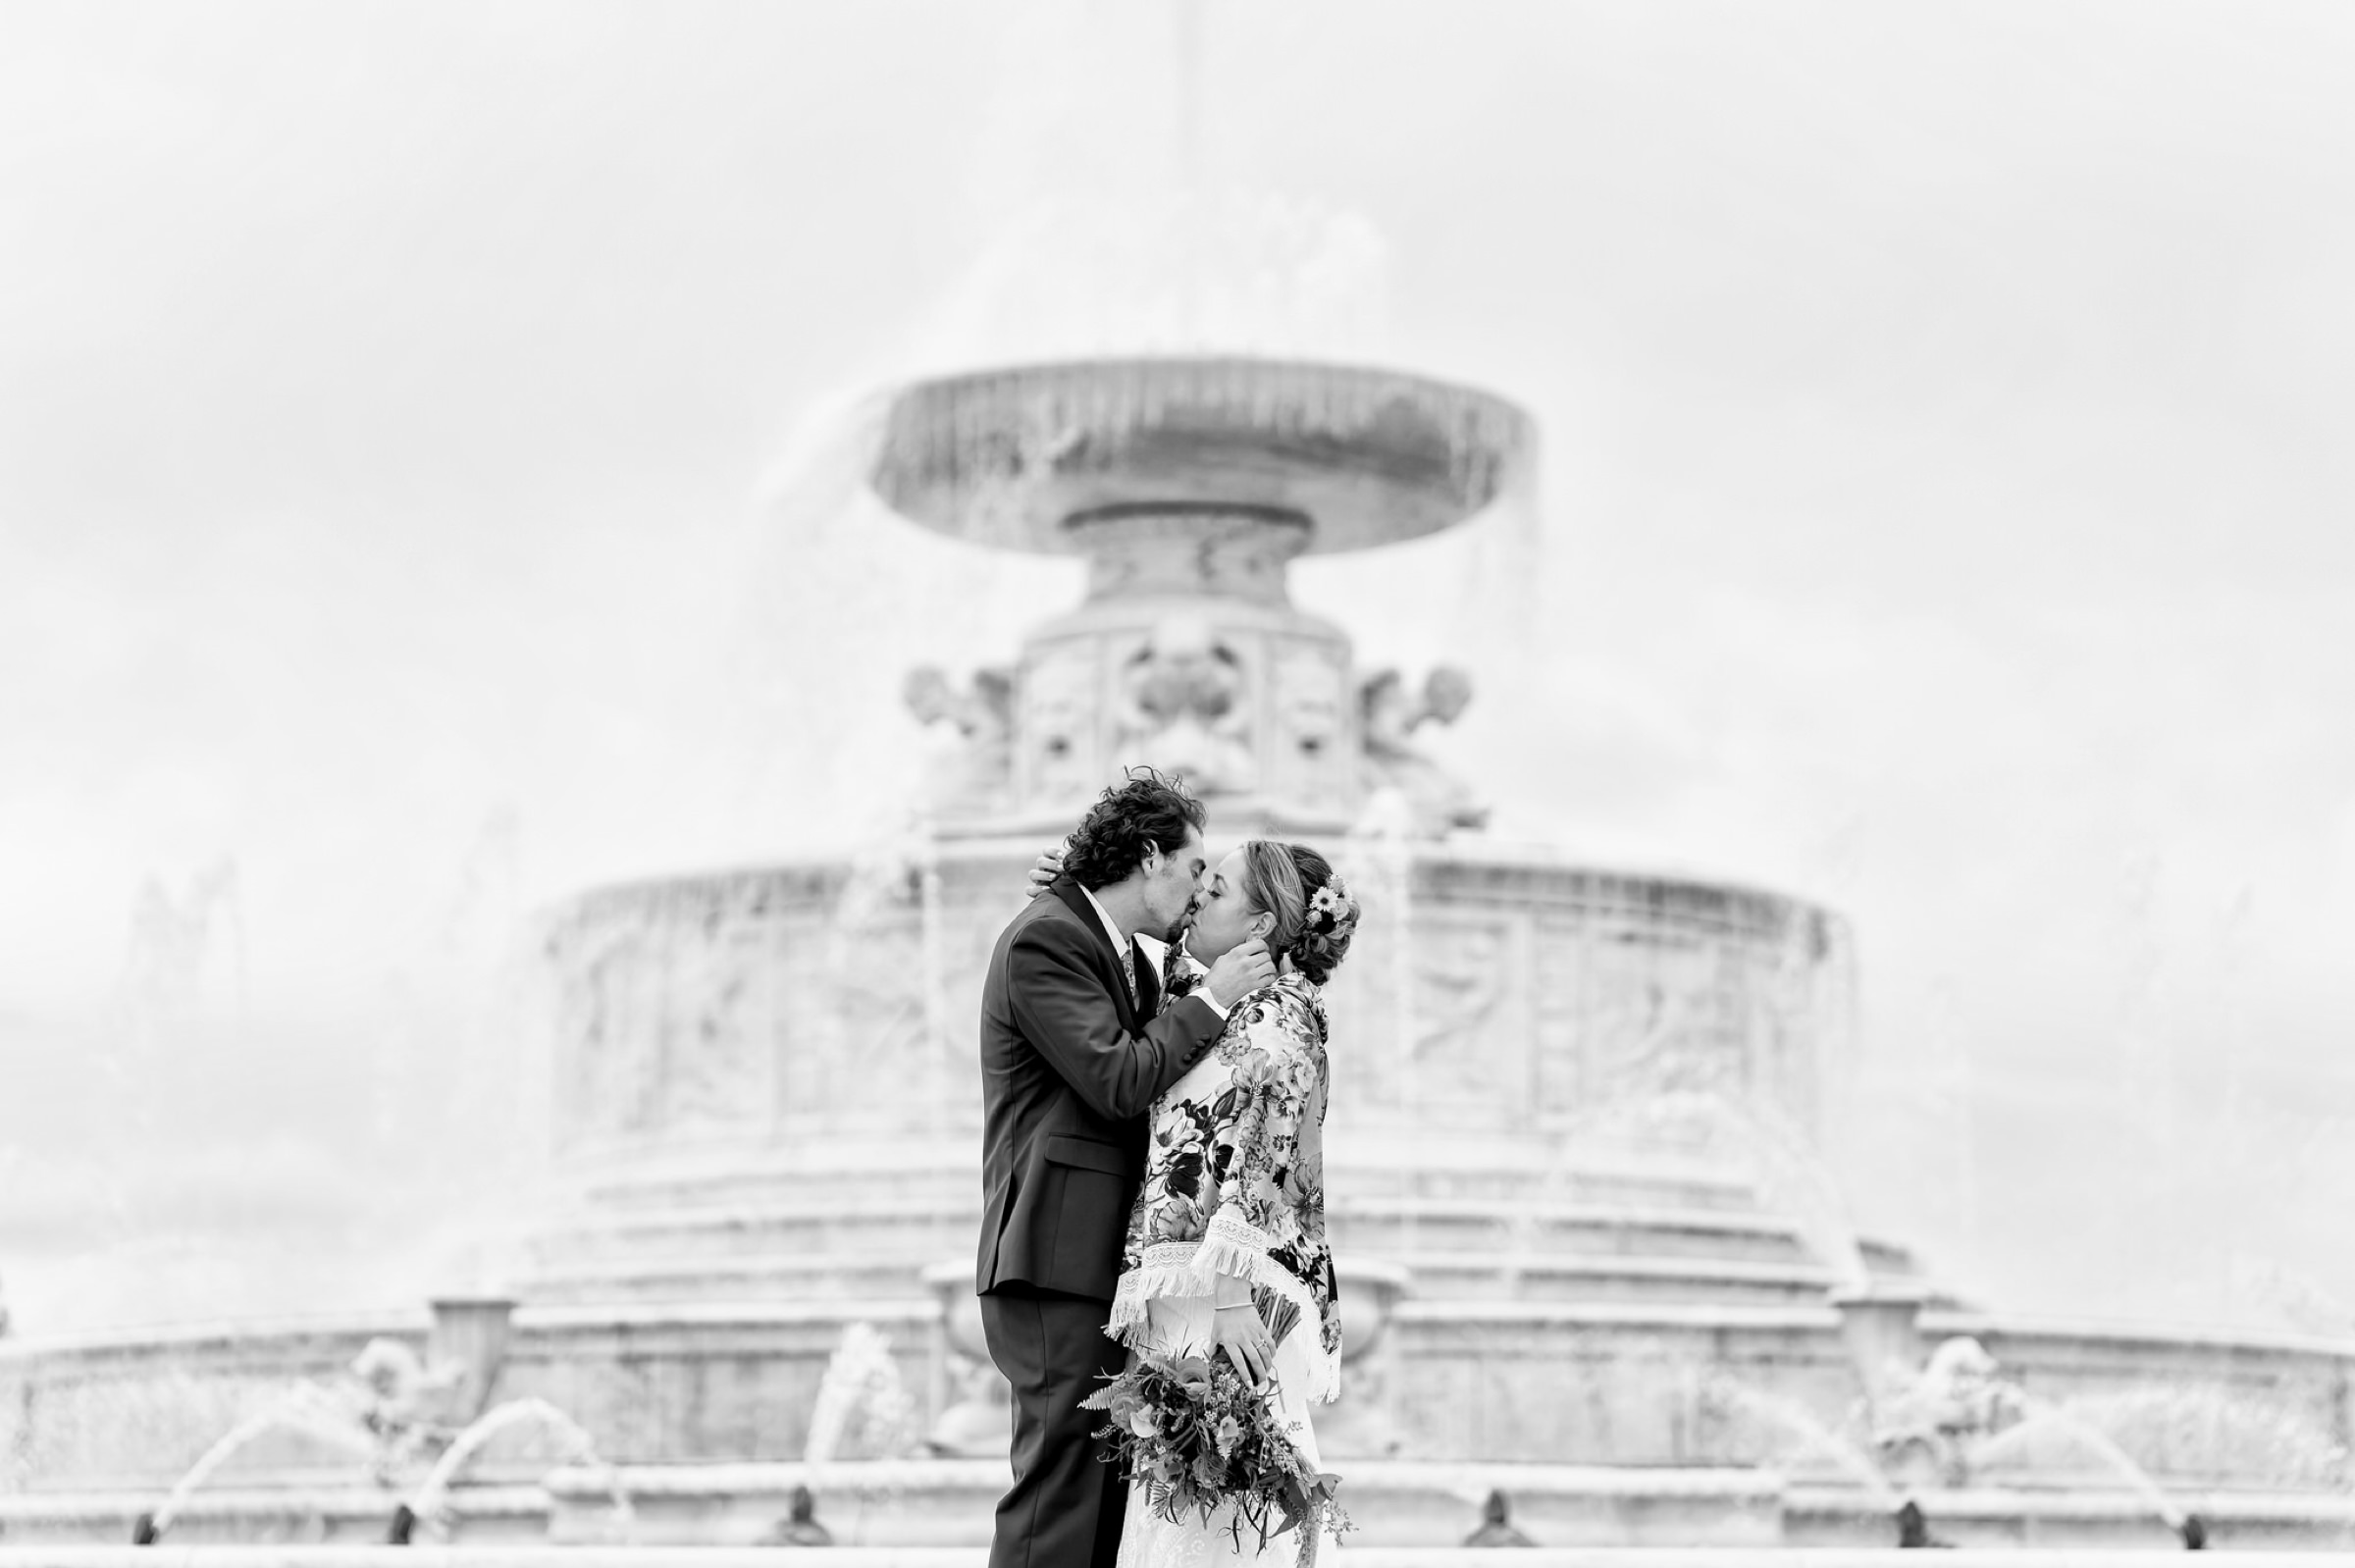 A bride and groom kiss in front of the Fountain on Belle Isle on their wedding day.  